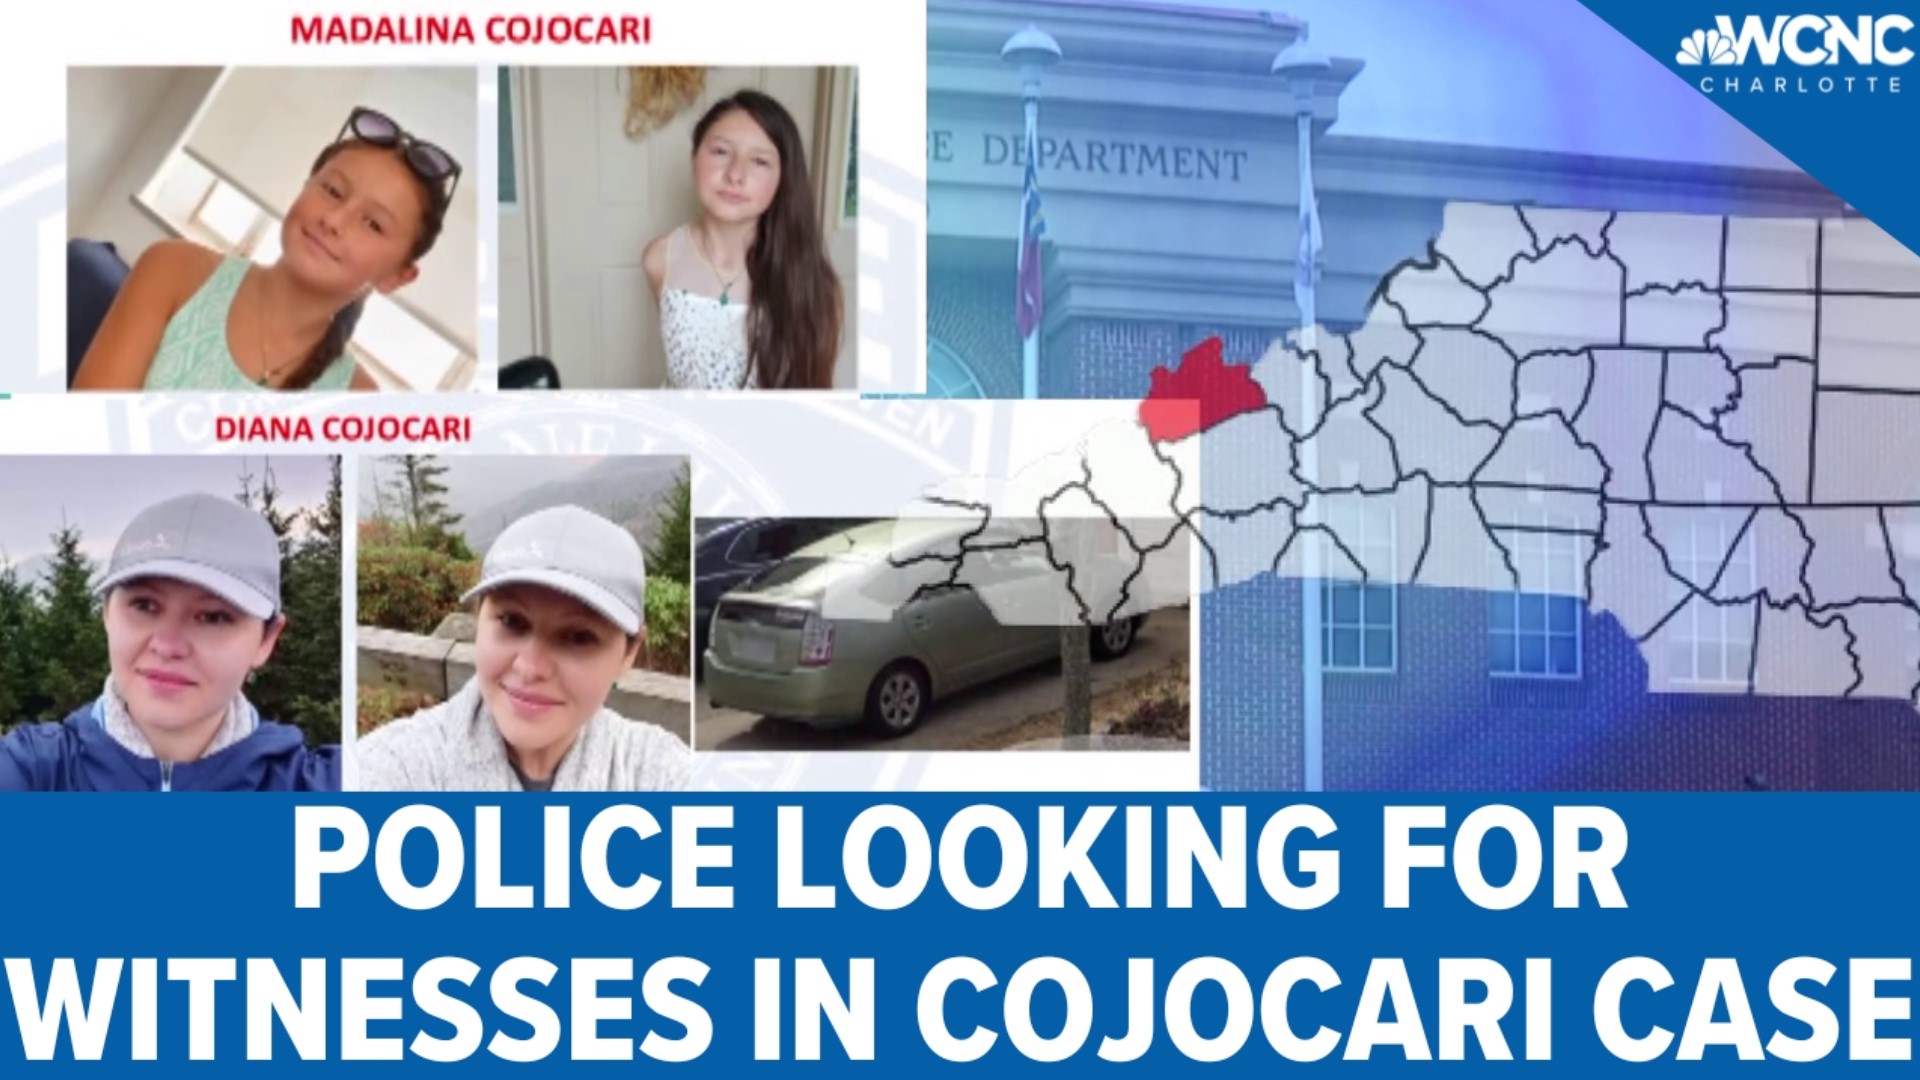 If you have any information concerning the whereabouts of Madalina Cojocari, please contact the Cornelius Police Department.